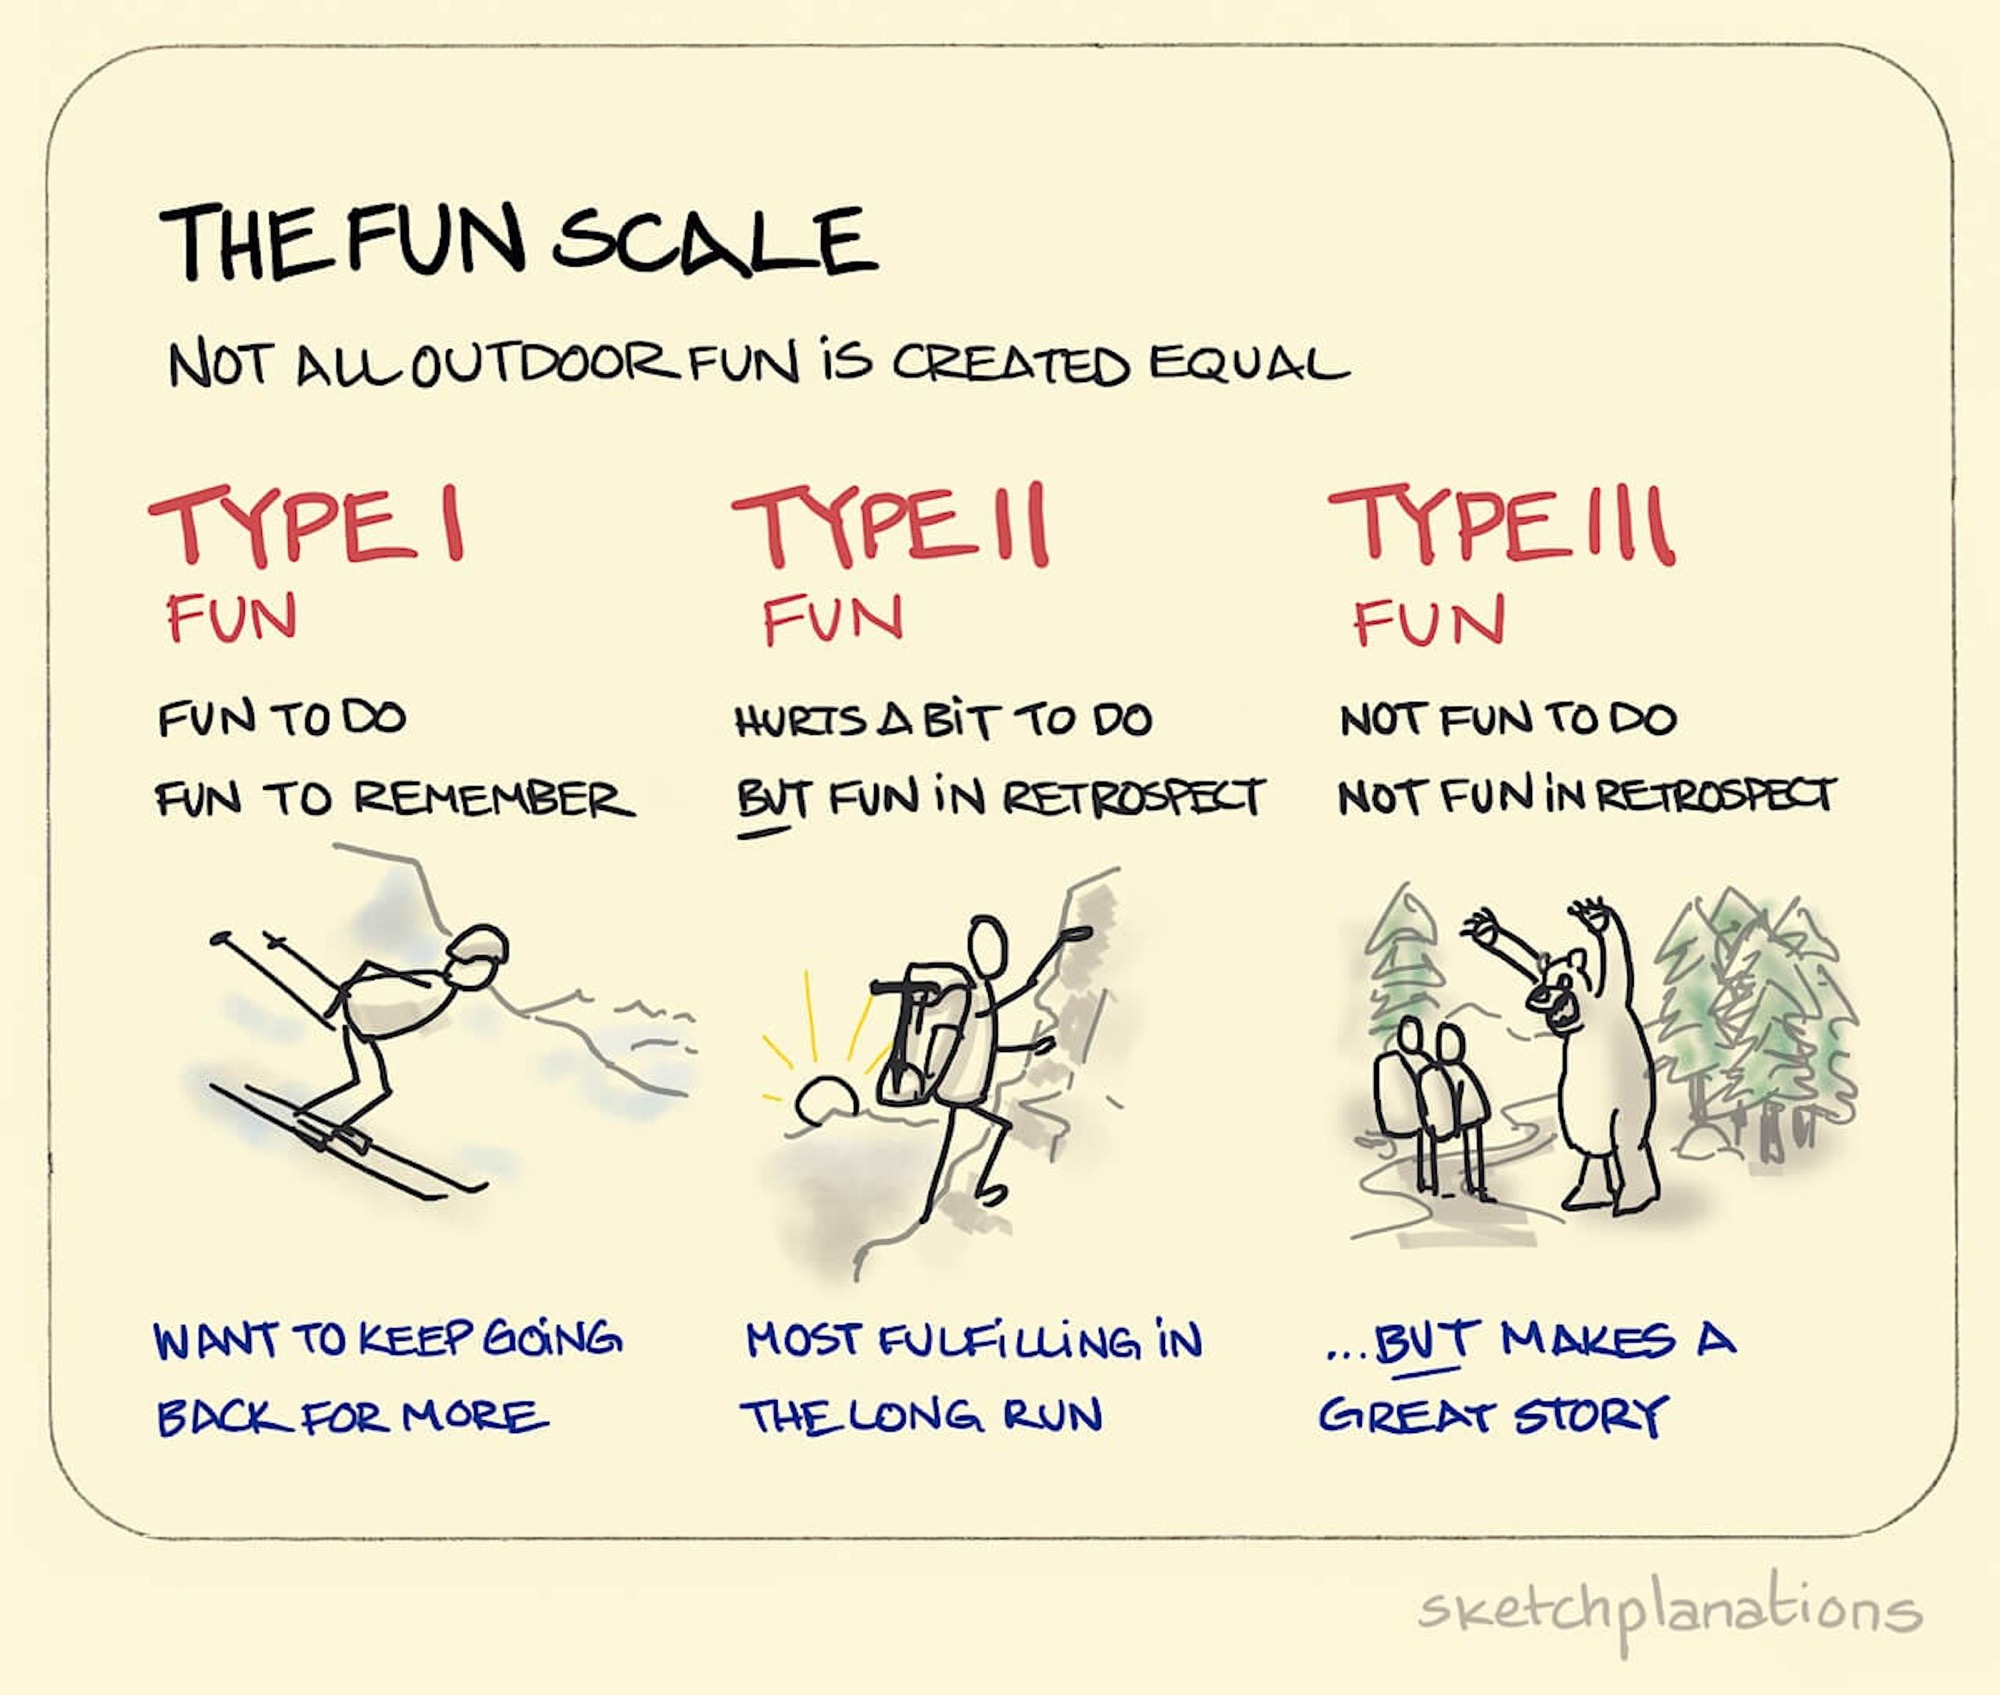 The Fun Scale: An Outdoor Activity Guide To Measure How Totally Fun It Is To Go Outdoors